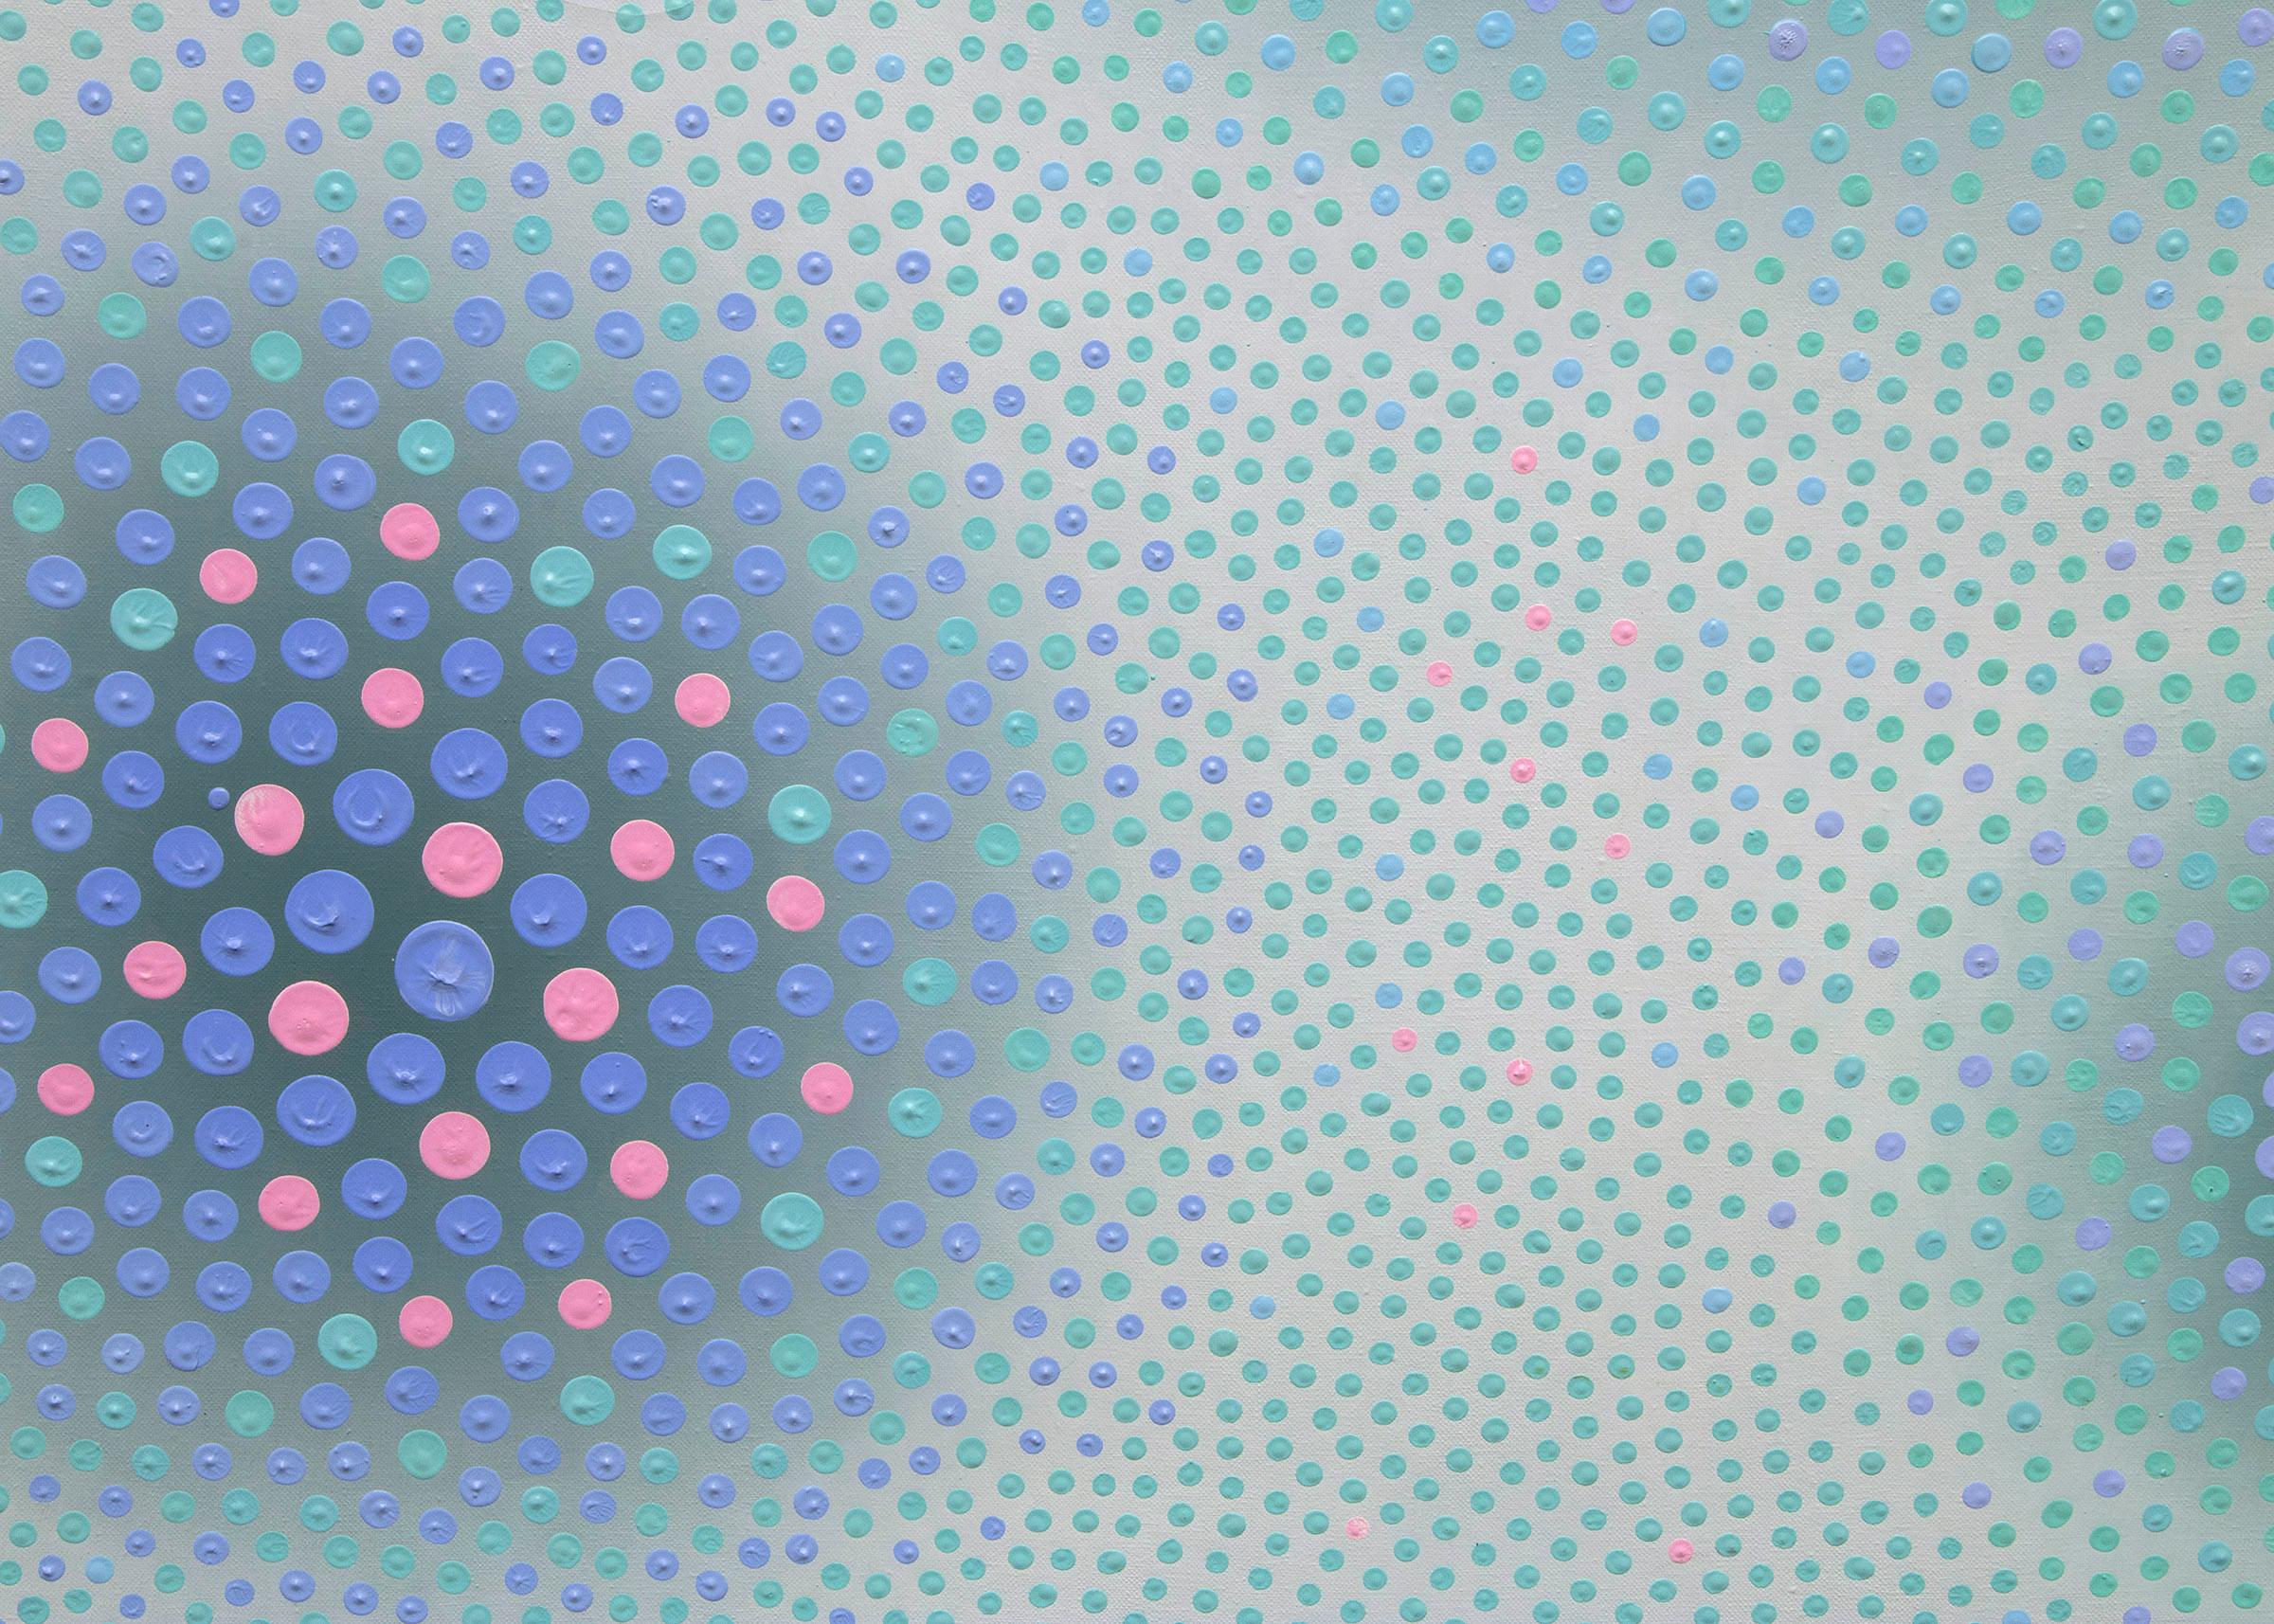 Cool Colors in Space #22 (Abstract Dot Painting) 2